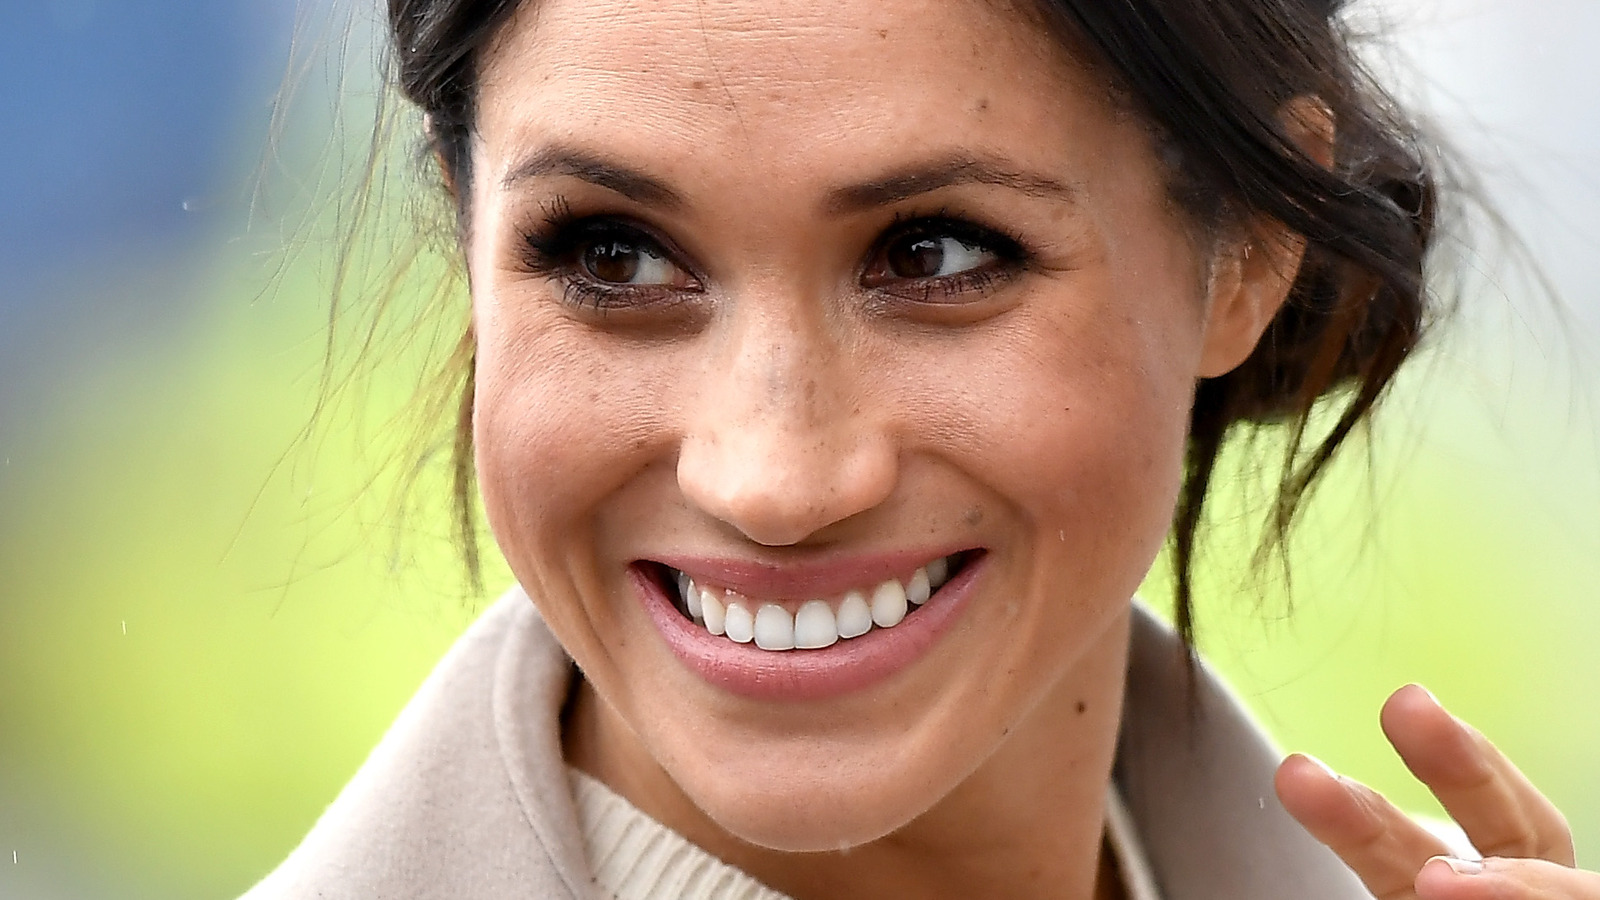 The Ellen Interview With Meghan Markle is Not a Good Idea.